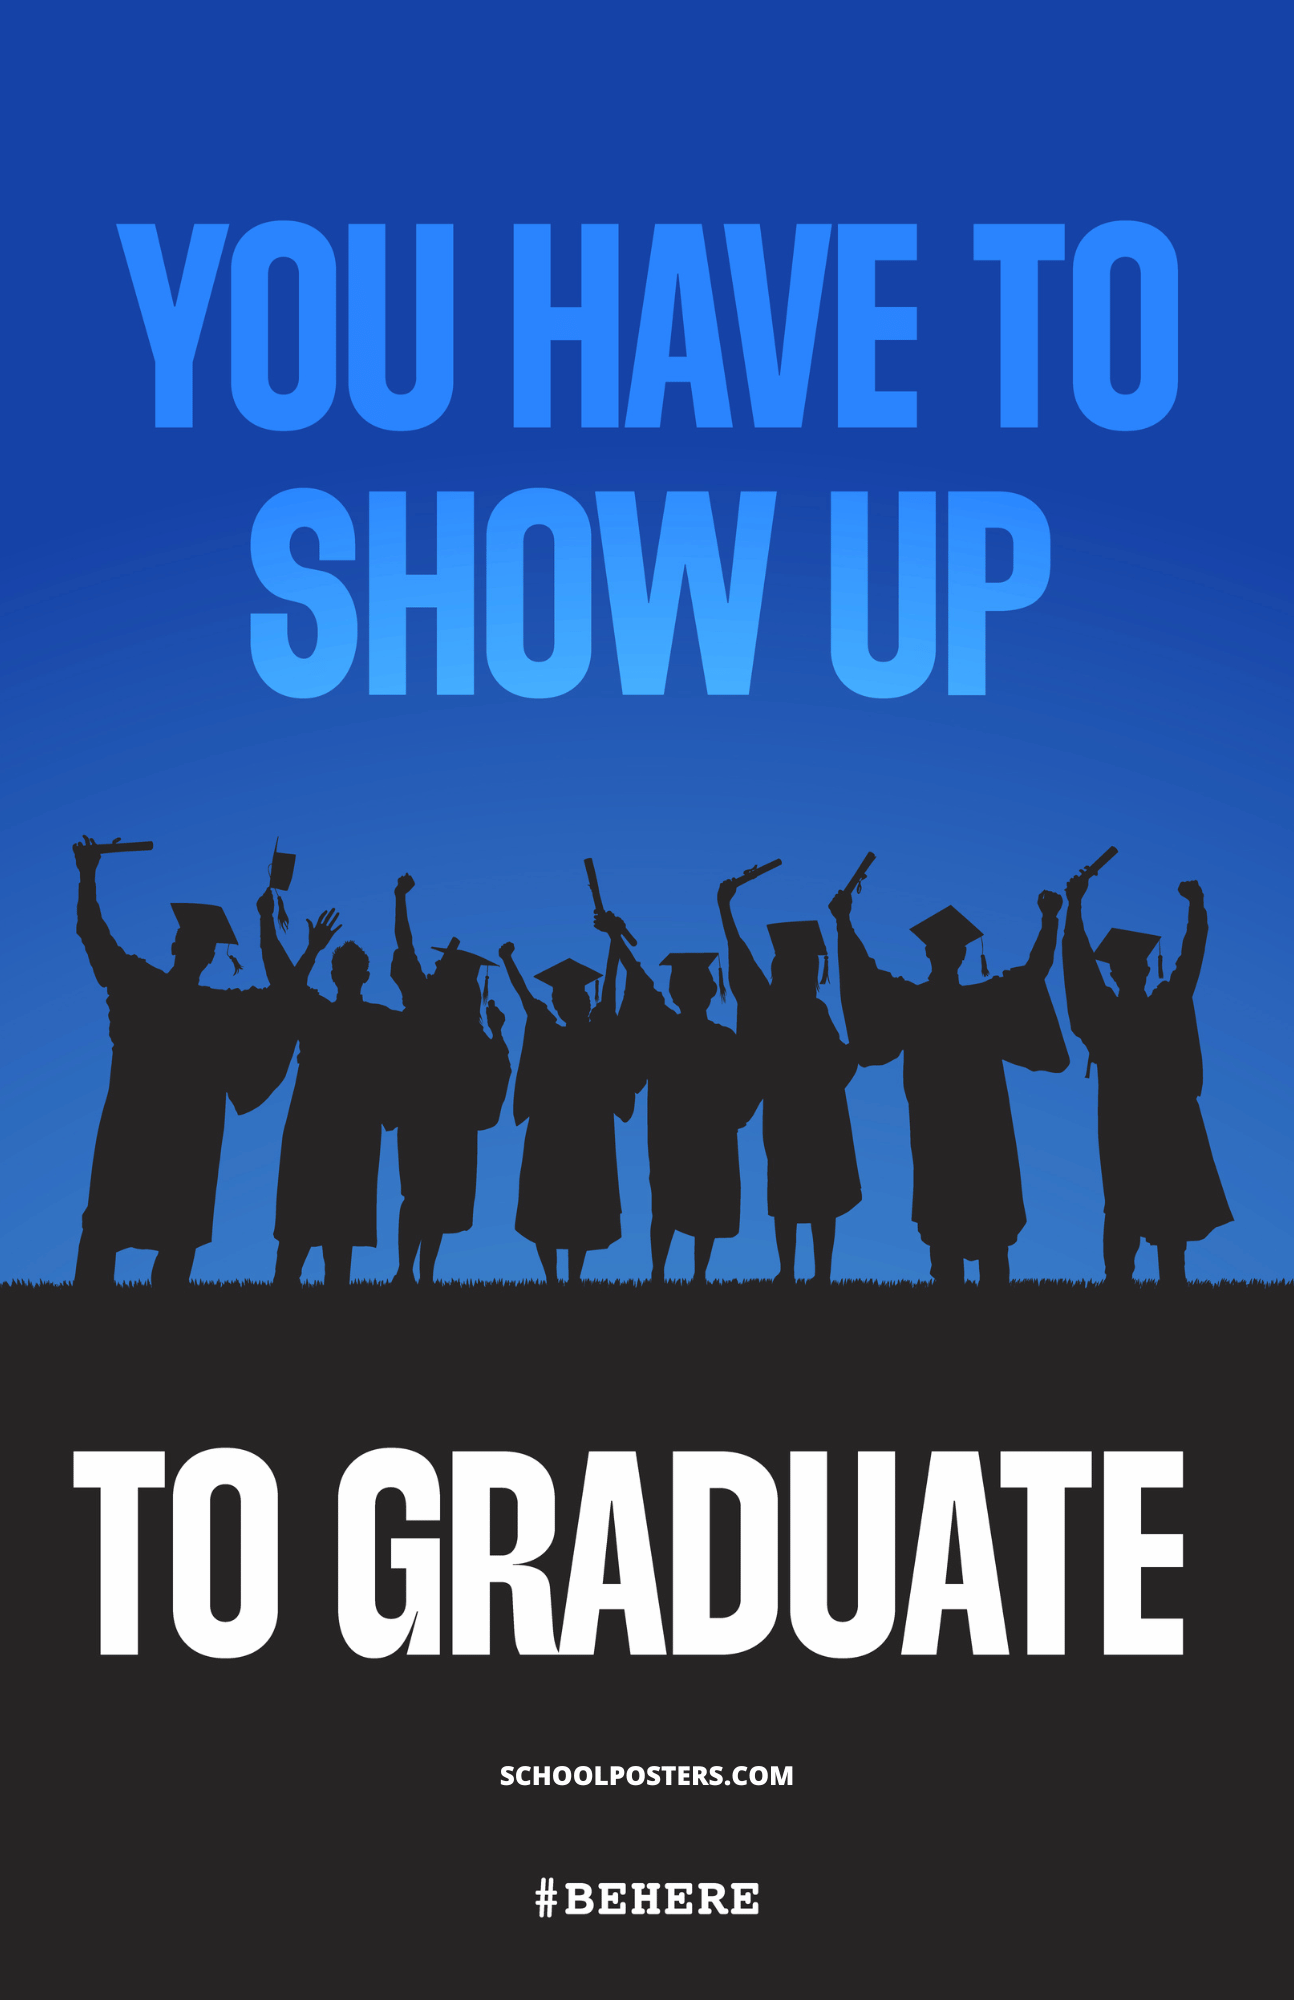 Show Up to Graduate Attendance Poster